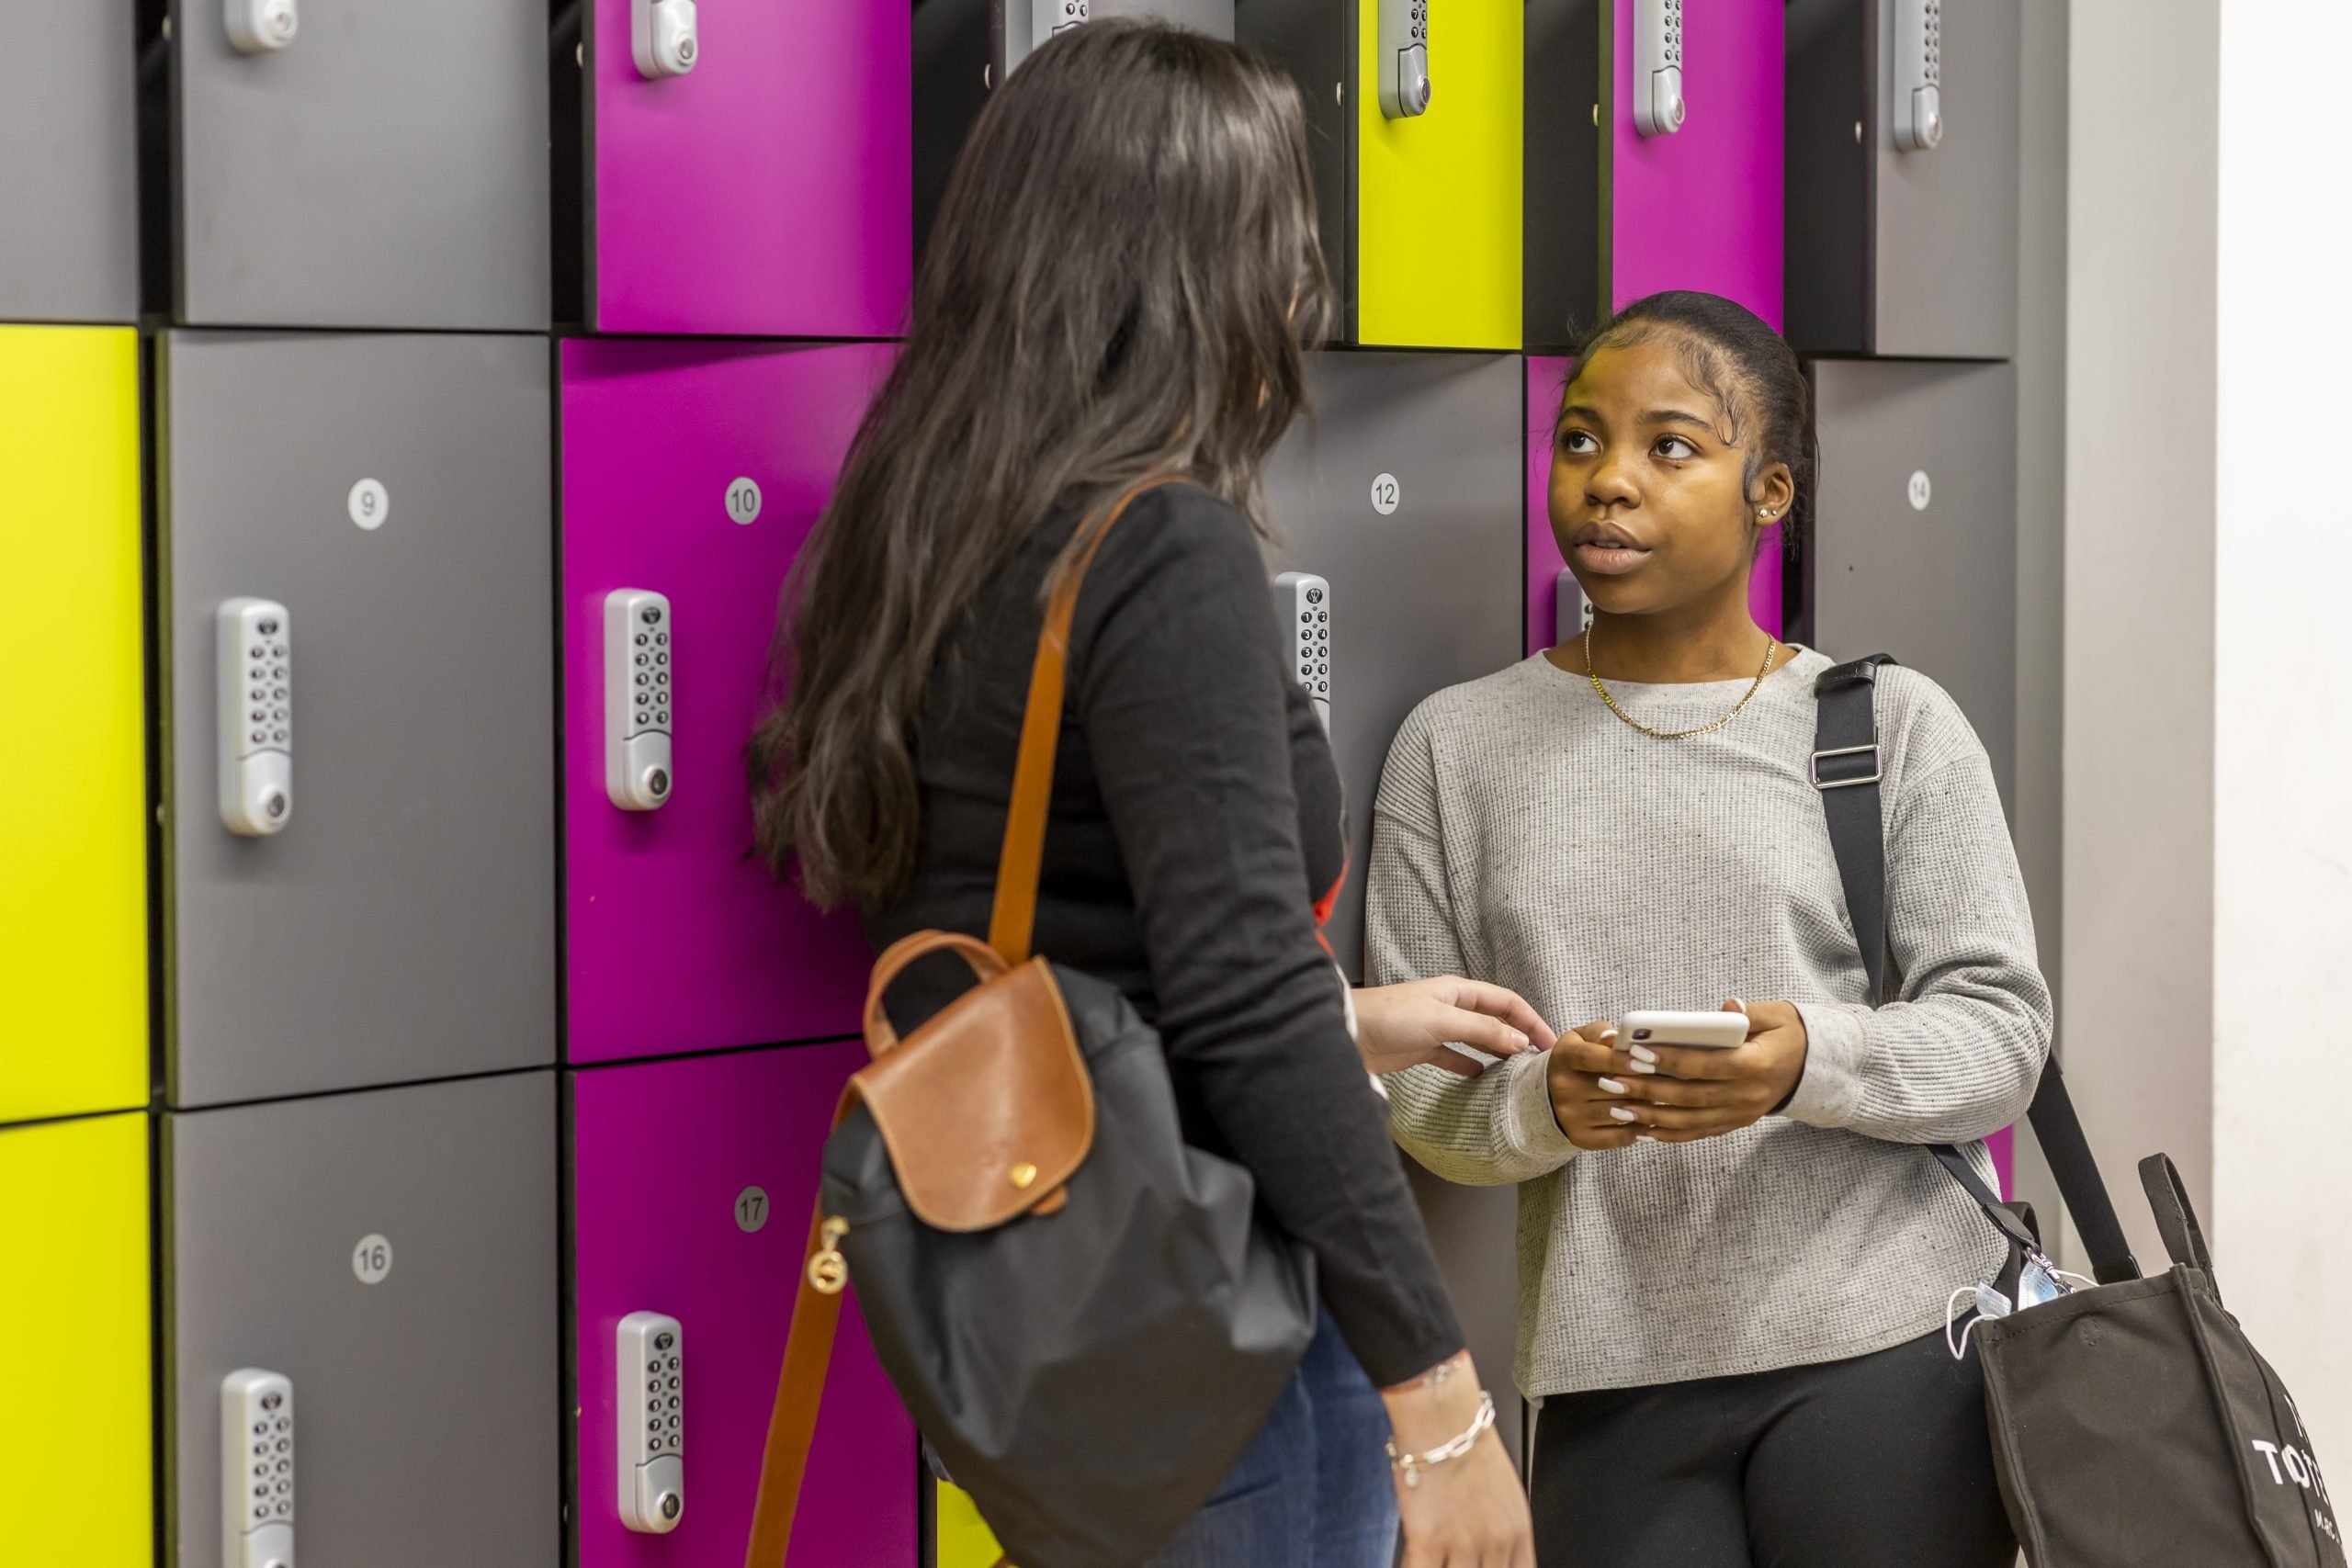 Two young people are standing in a school corridor, leaning against pink and grey lockers. One is wearing grey and the other is wearing black. They are talking about masturbation and wondering, what happens when you wank too much?